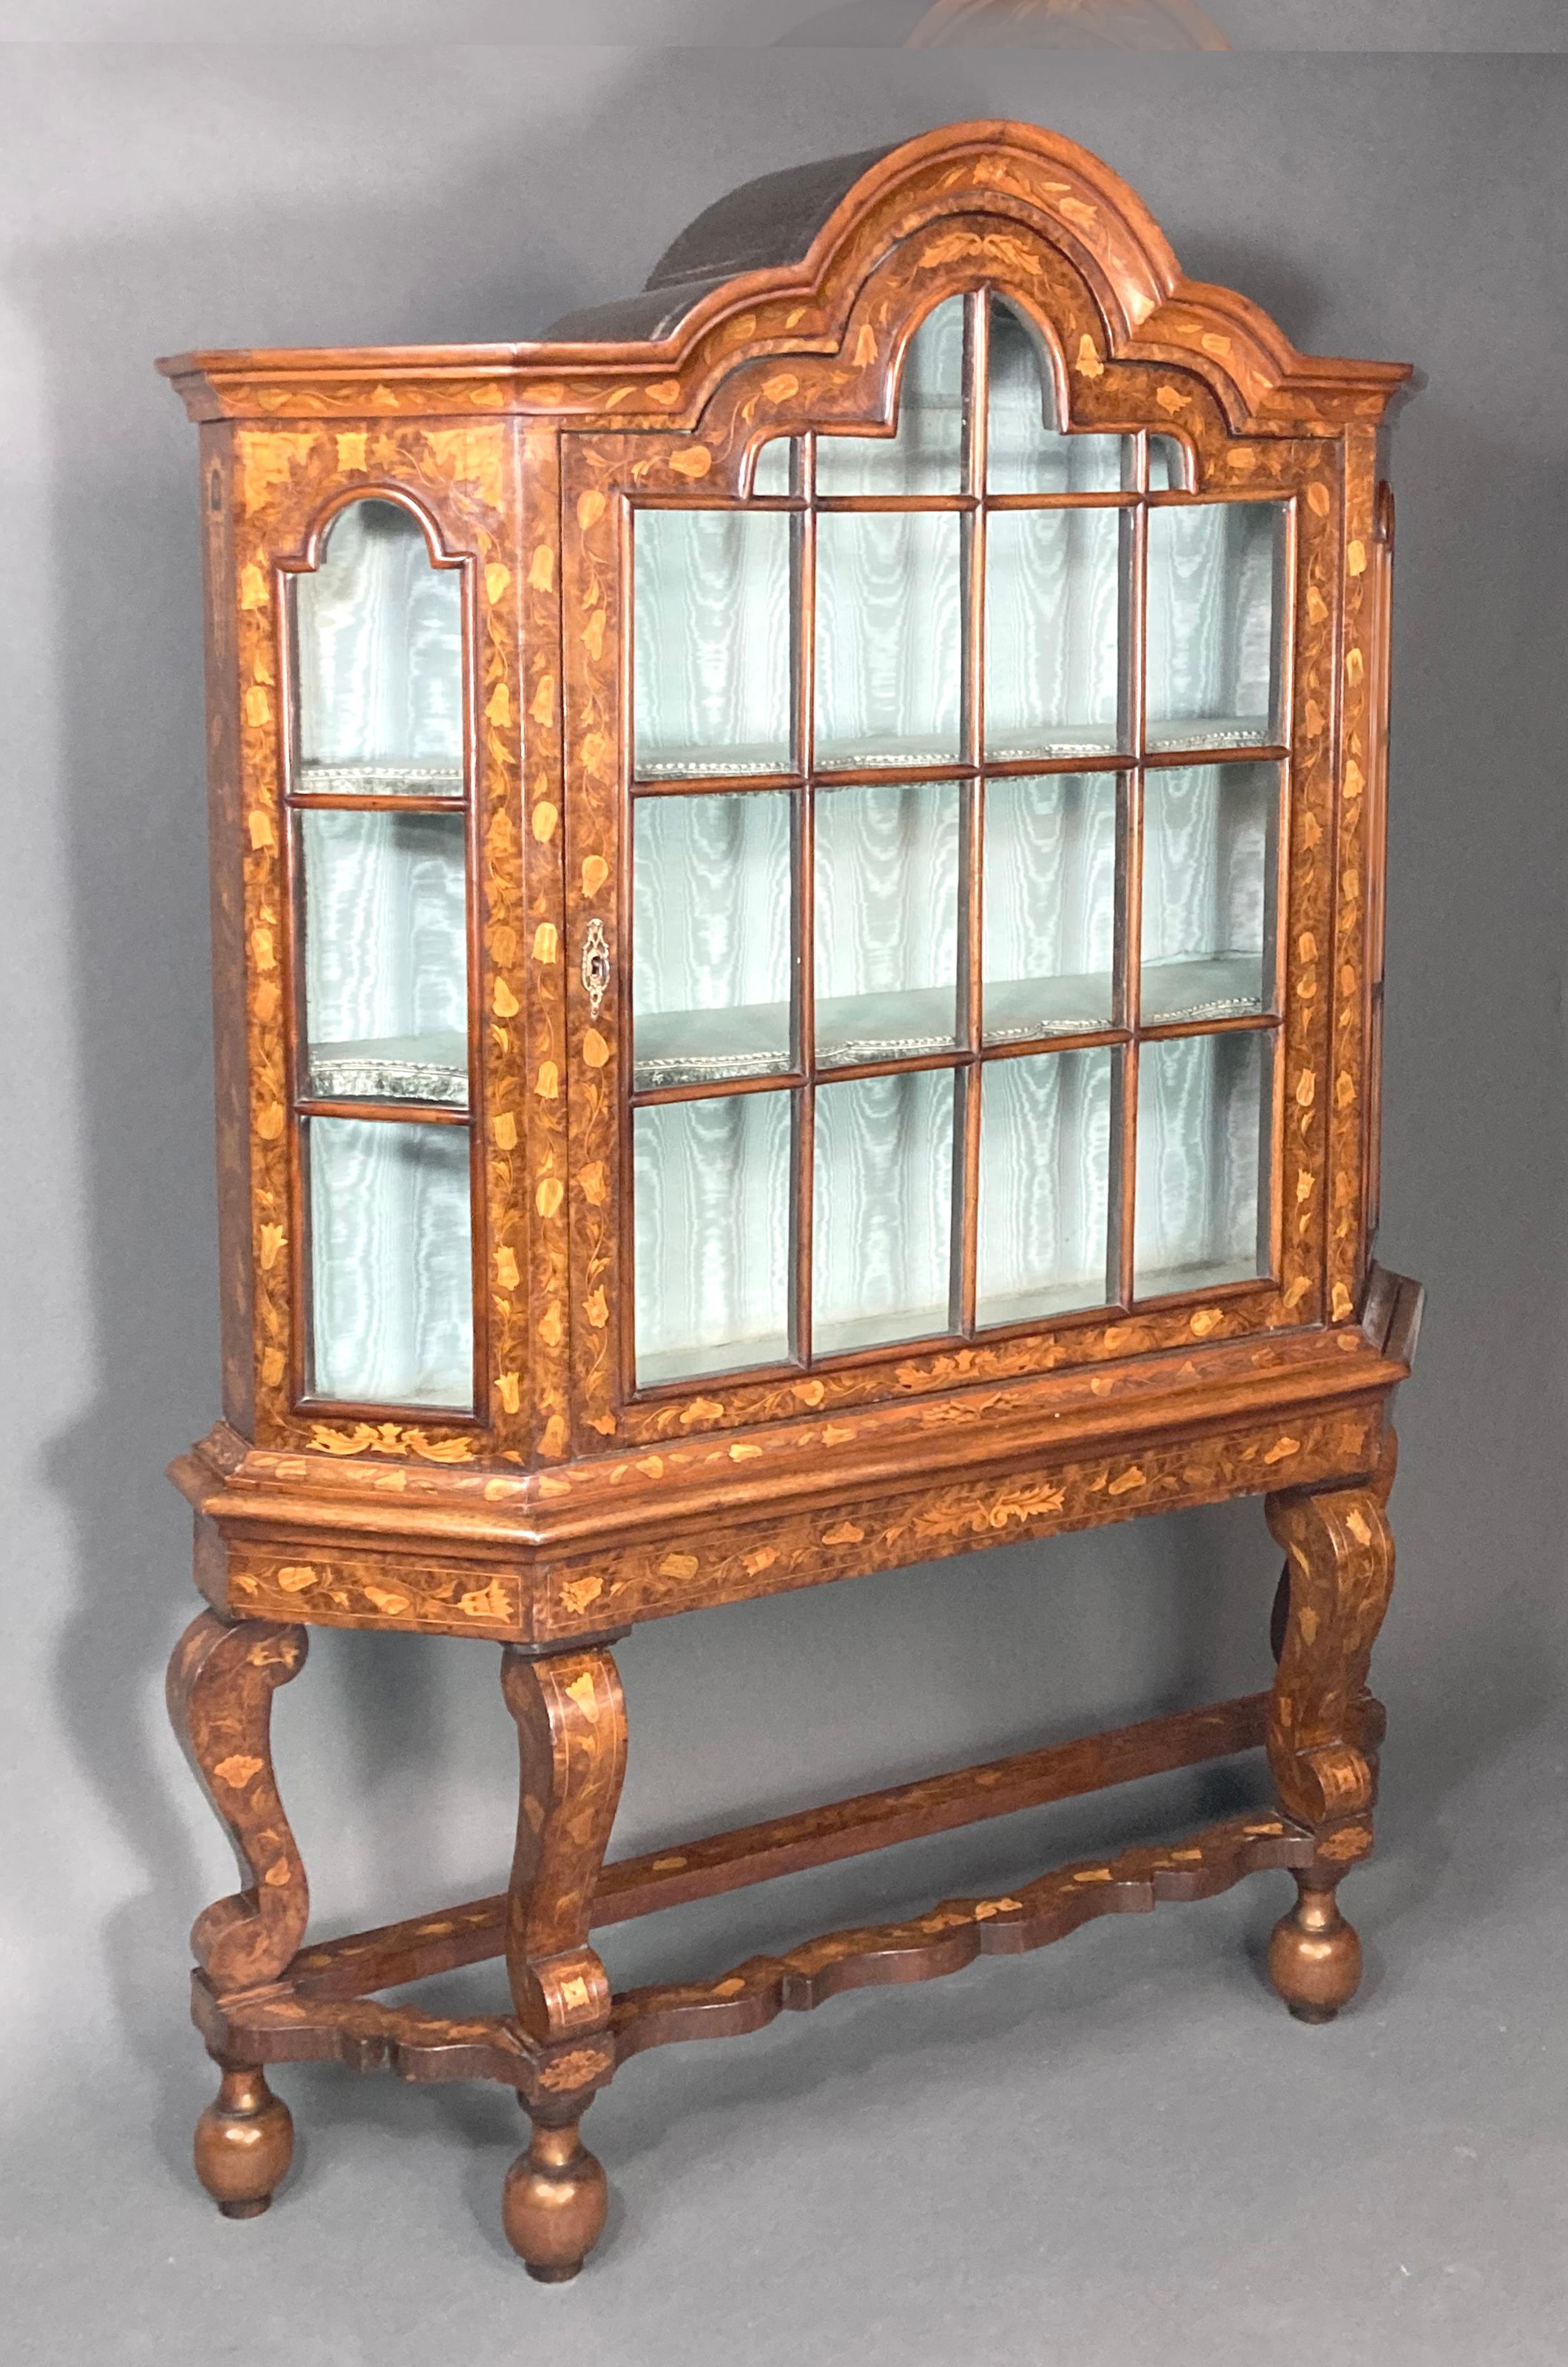 Dutch Marquetry Glazed Cabinet In Good Condition For Sale In Bradford-on-Avon, Wiltshire